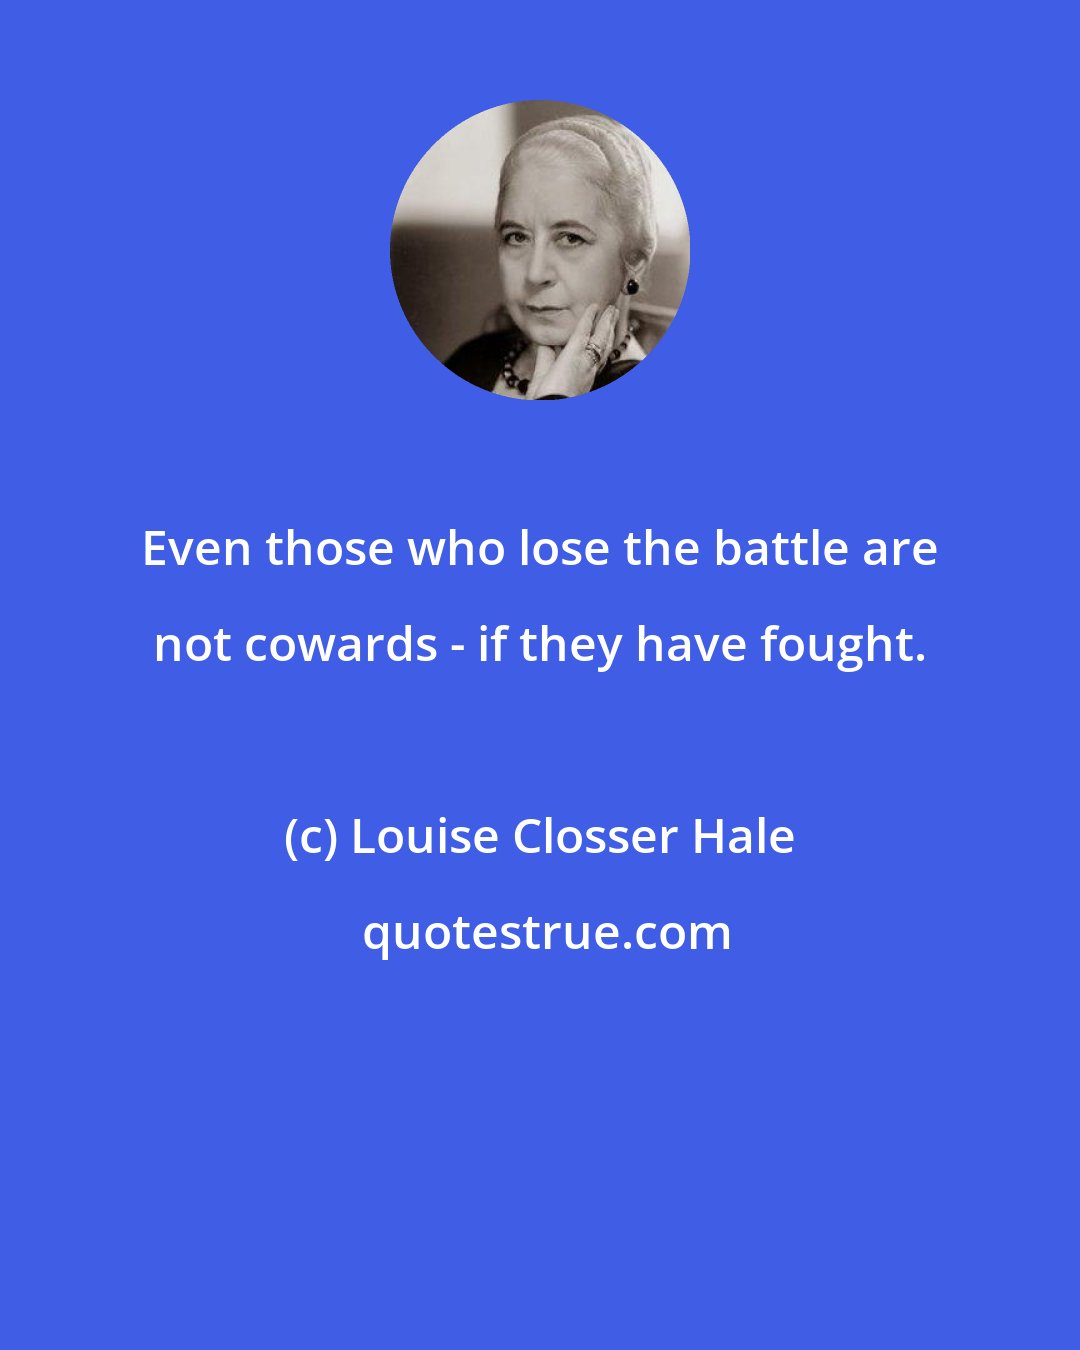 Louise Closser Hale: Even those who lose the battle are not cowards - if they have fought.